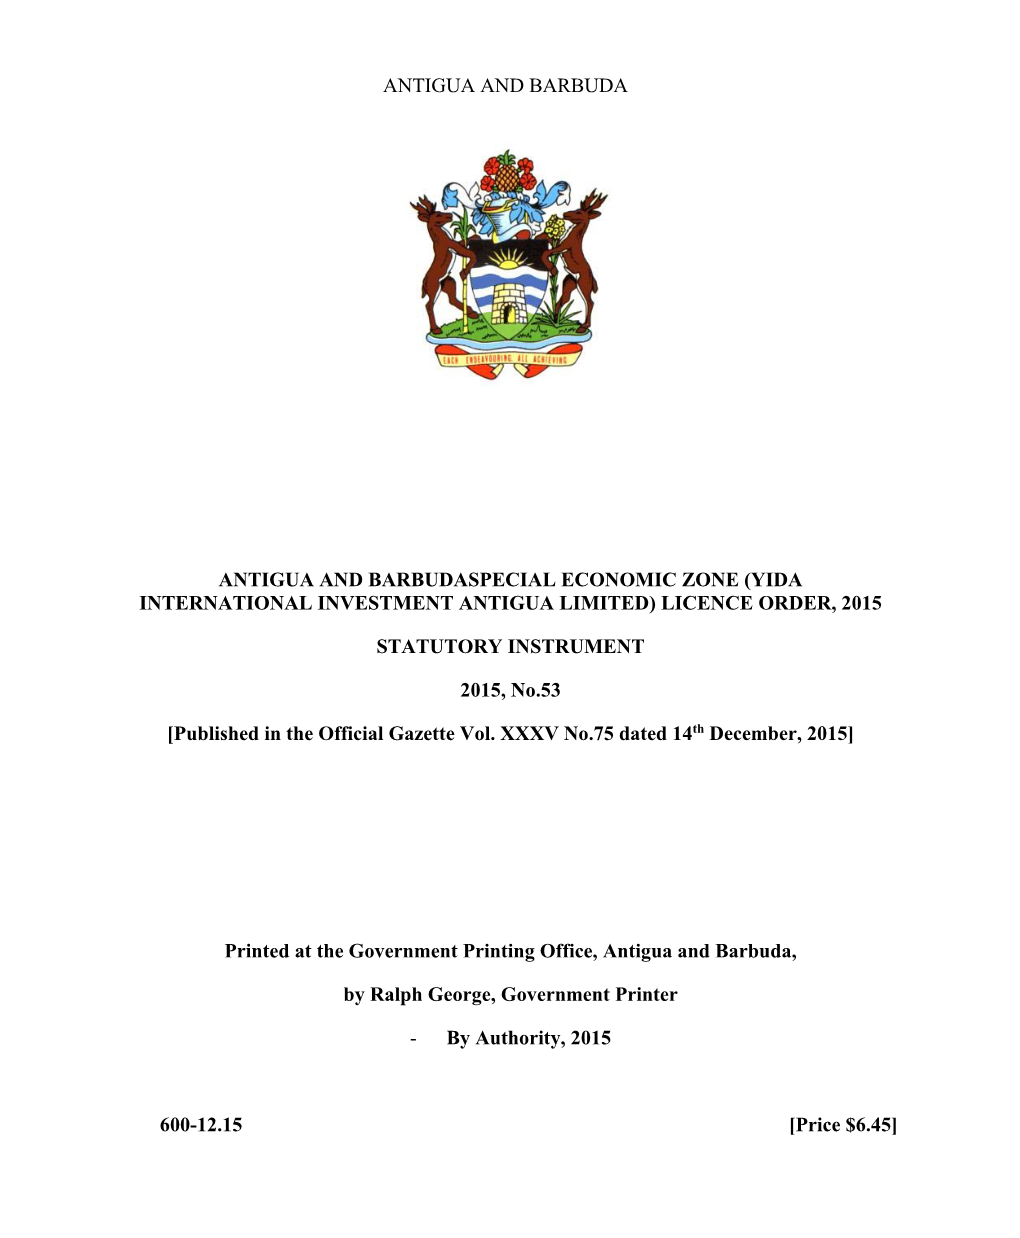 Yida International Investment Antigua Limited) Licence Order, 2015